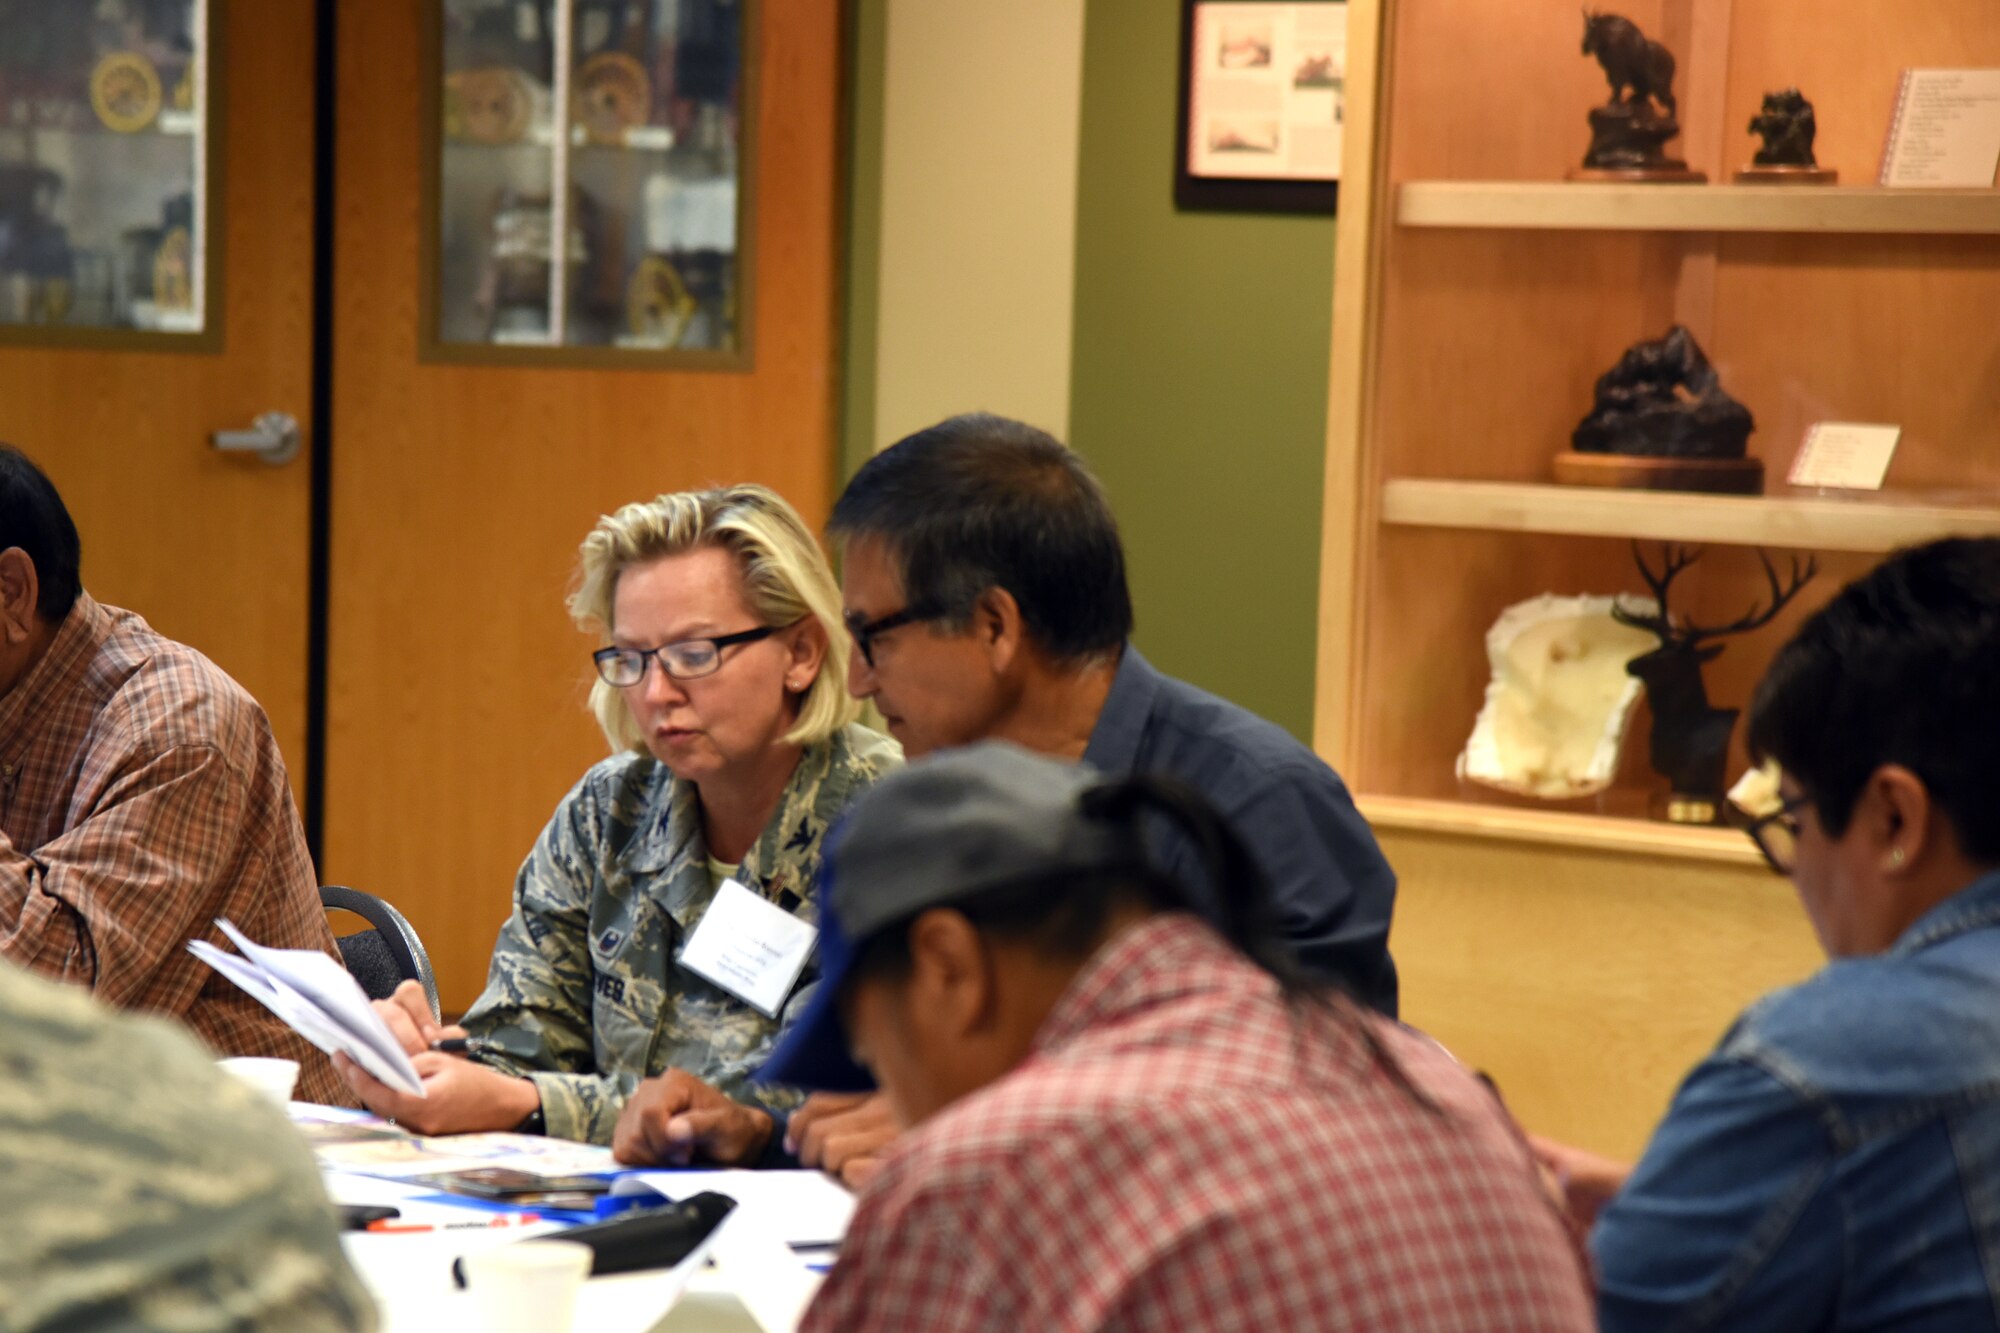 180712-F-UQ541-1151 Col. Jennifer Reeves, 341st Missile Wing commander, and Conrad Fisher, Northern Cheyenne Tribe vice president, exchange information at the third annual tribal relations meeting July 12, 2018, at the C.M. Russell Museum, in Great Falls, Mont. Members of the Blackfeet Nation, Chippewa Cree Tribe, Confederated Salish and Kootenai Tribes, Crow Tribe, Fort Belknap Assiniboine and Gros Ventres Tribes and Northern Cheyenne Tribe also attended the meeting. (U.S. Air Force photo by Kiersten McCutchan)